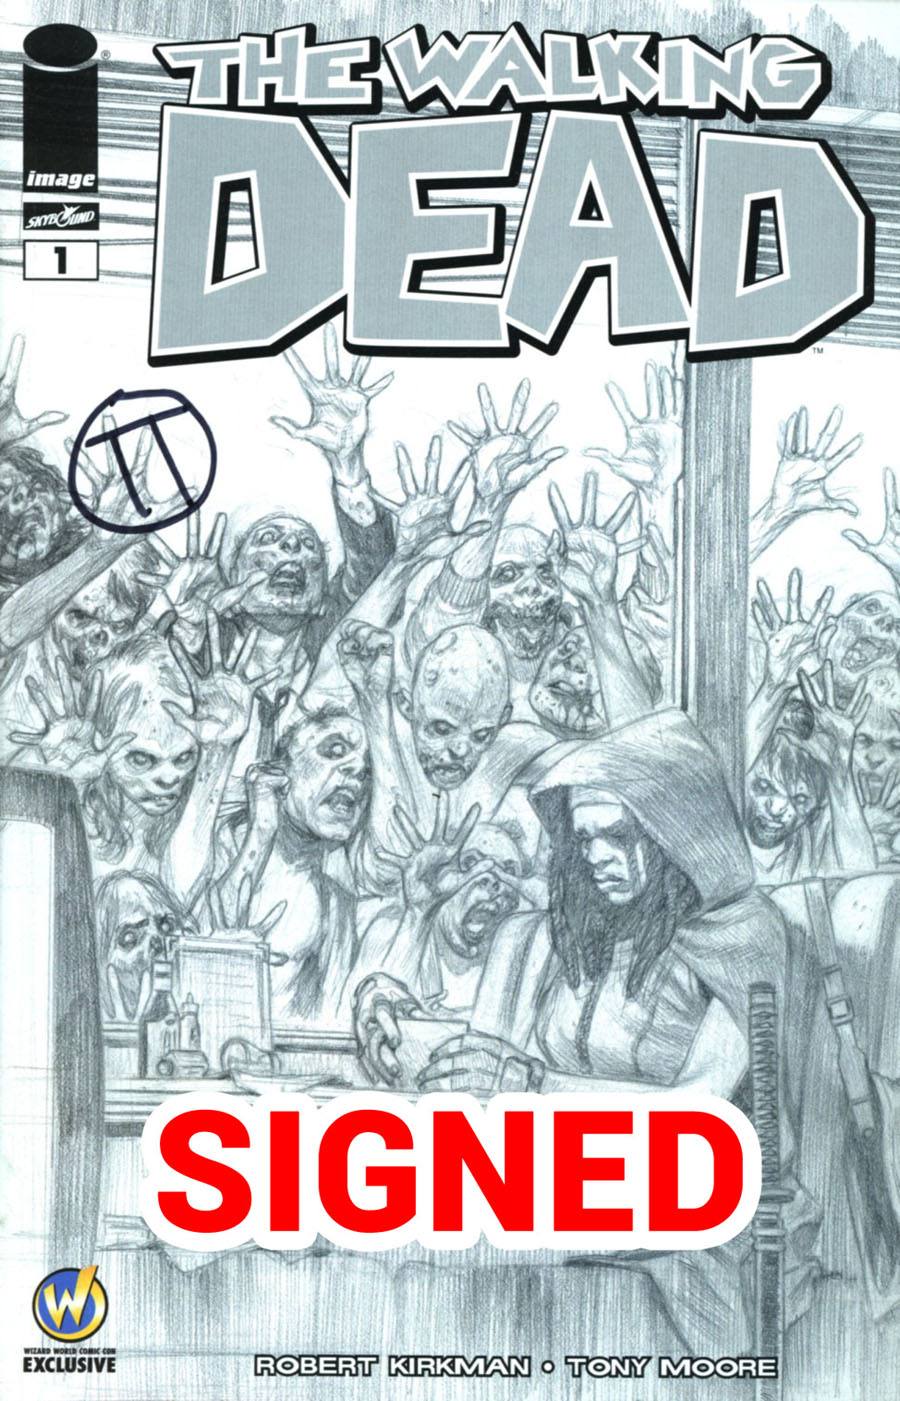 Walking Dead #1 Cover Z-W Wizard World Comic Con Fort Lauderdale VIP Exclusive Julian Tedesco Sketch Variant Cover Signed By Julian Tedesco